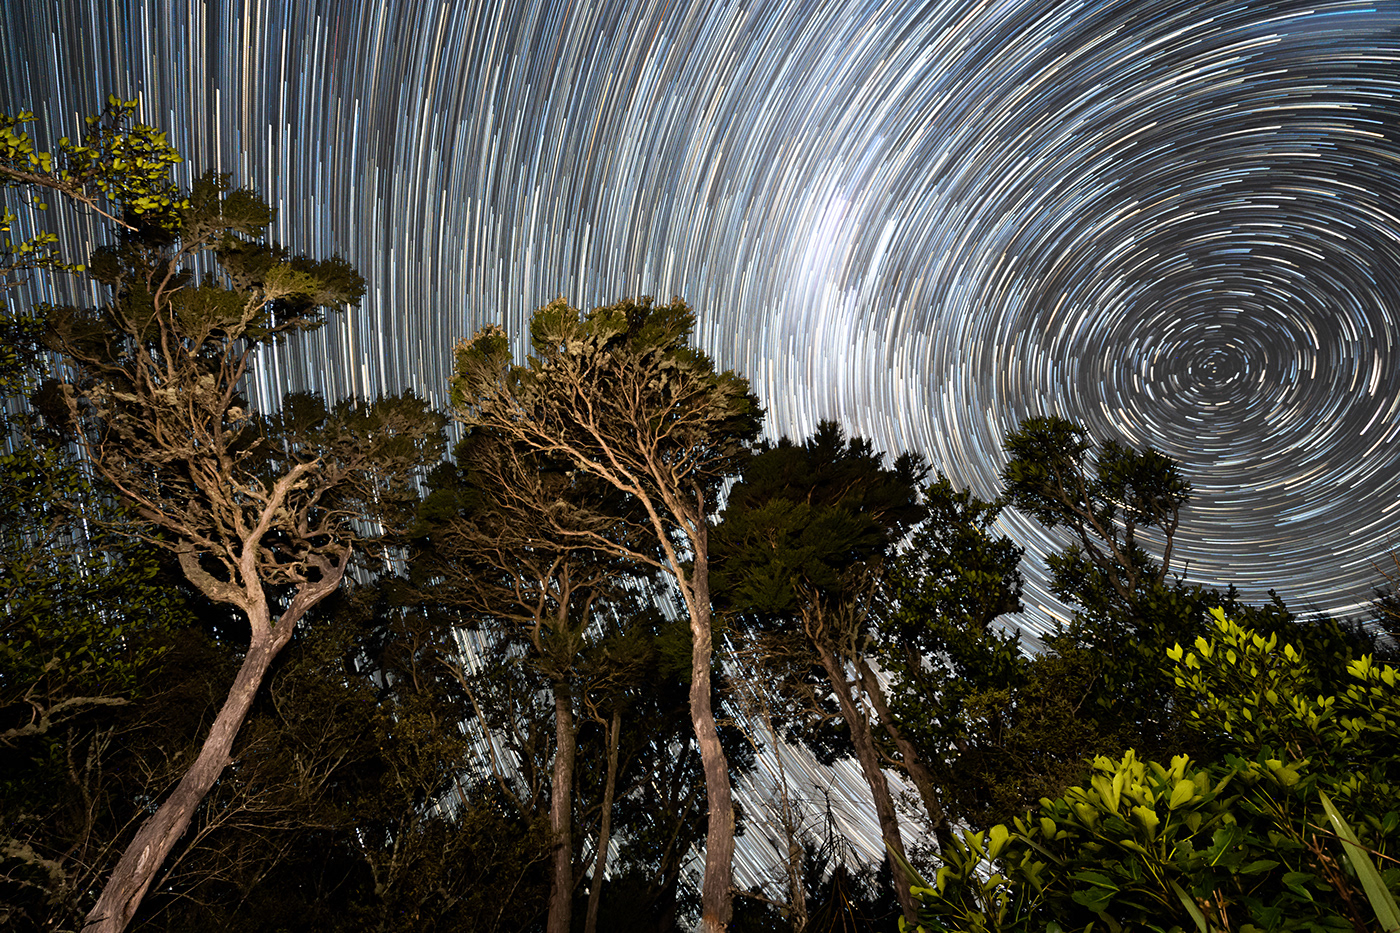 The silver peaks forest canopy with startrail